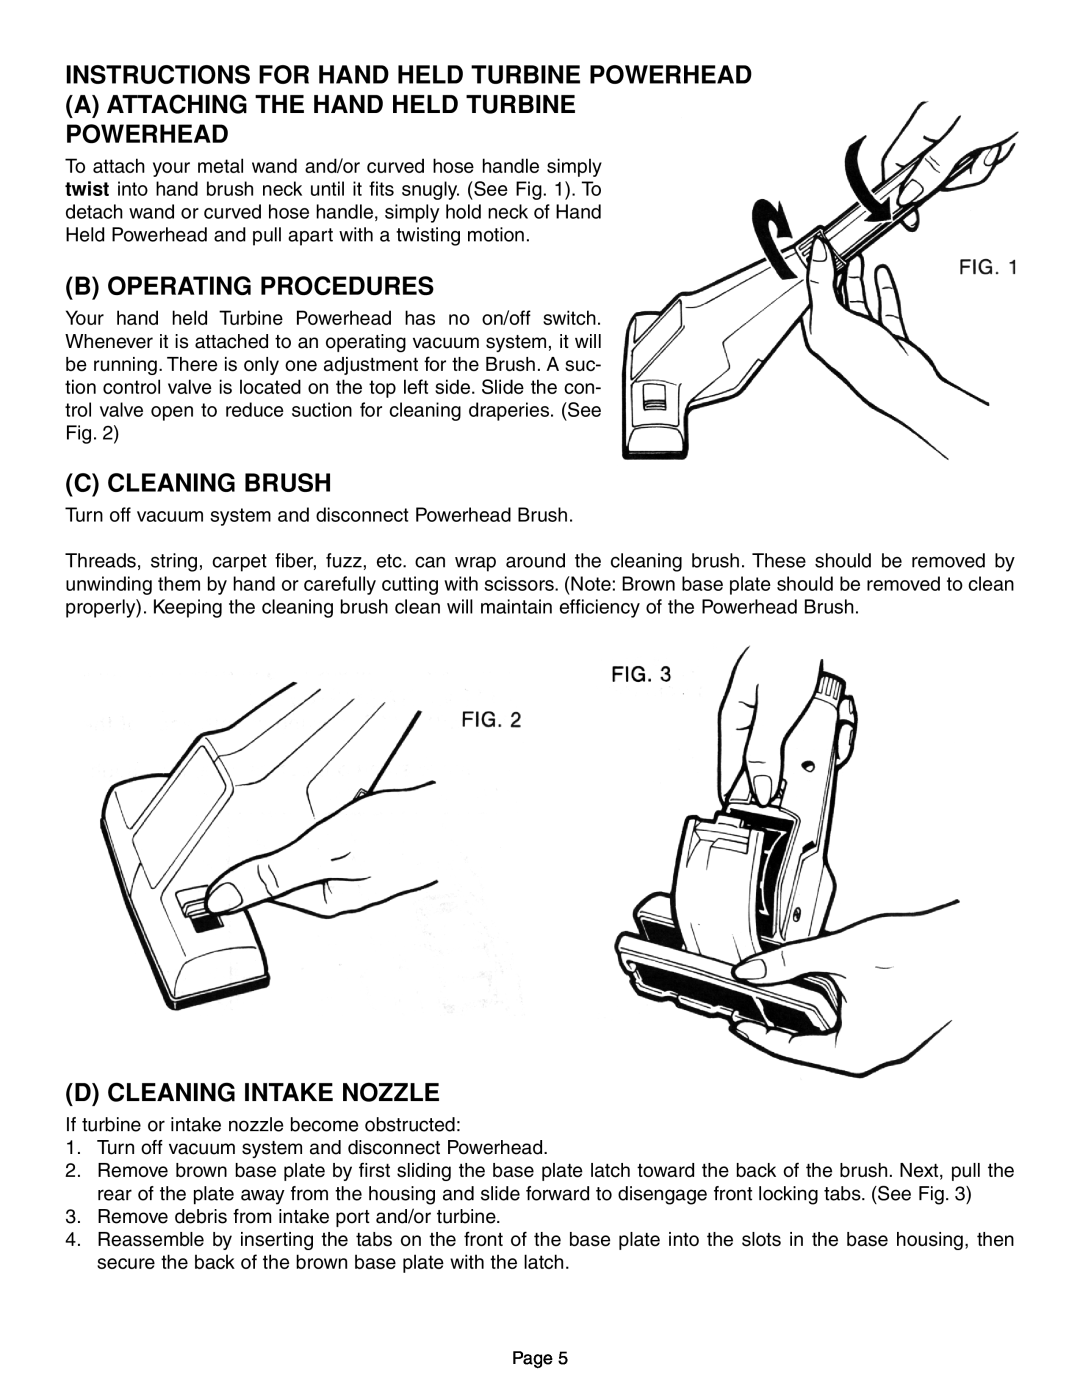 H-P Products 7161, T210 Instructions For Hand Held Turbine Powerhead, Aattaching The Hand Held Turbine Powerhead 